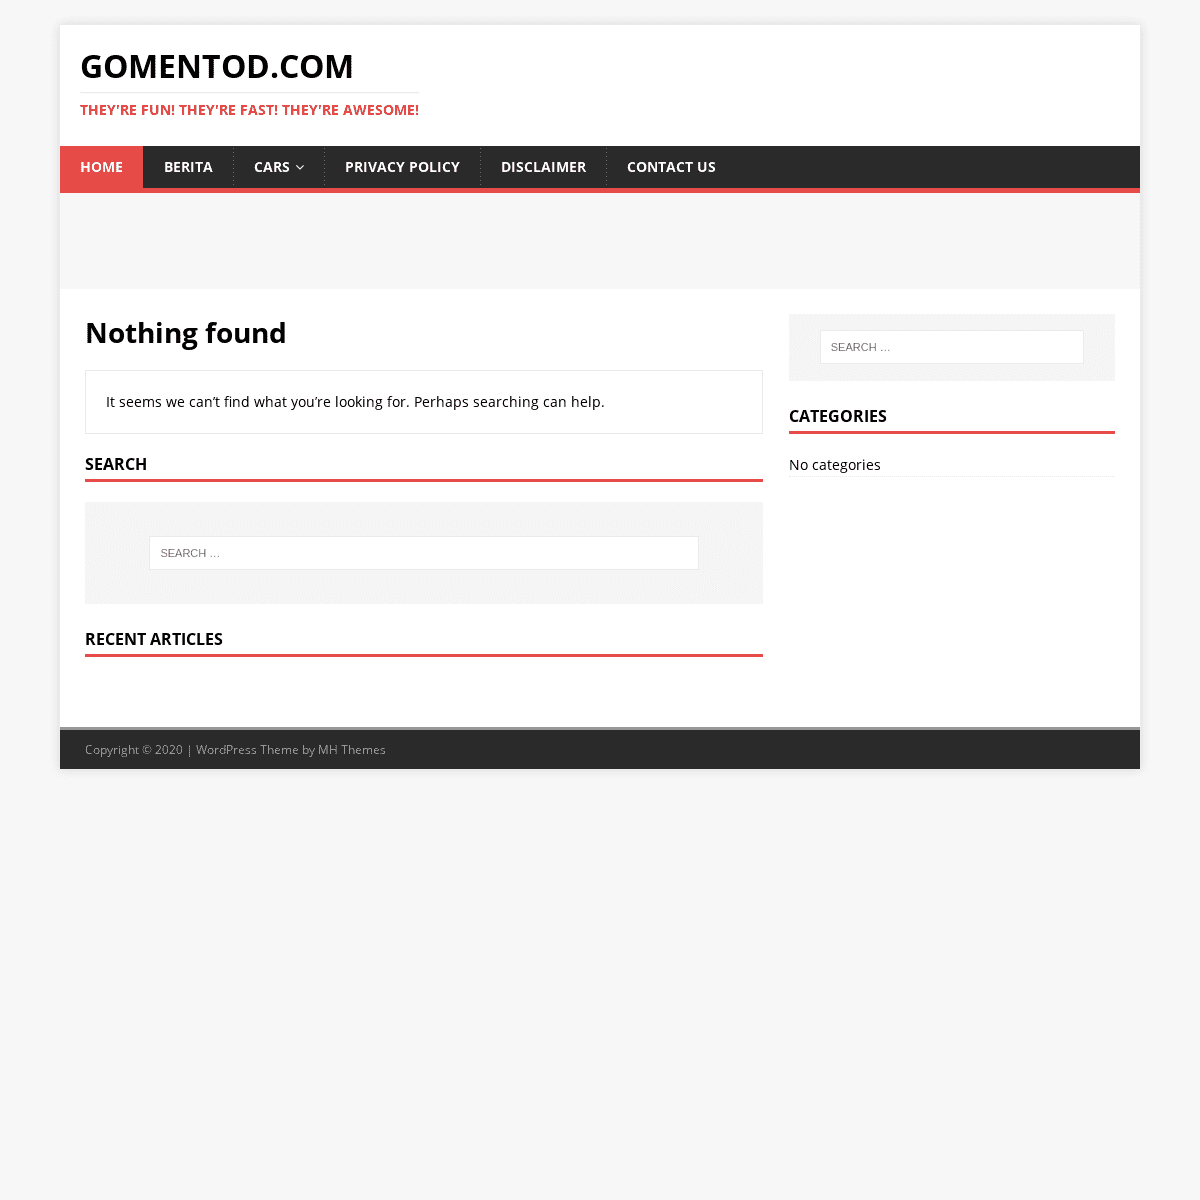 A complete backup of gomentod.com